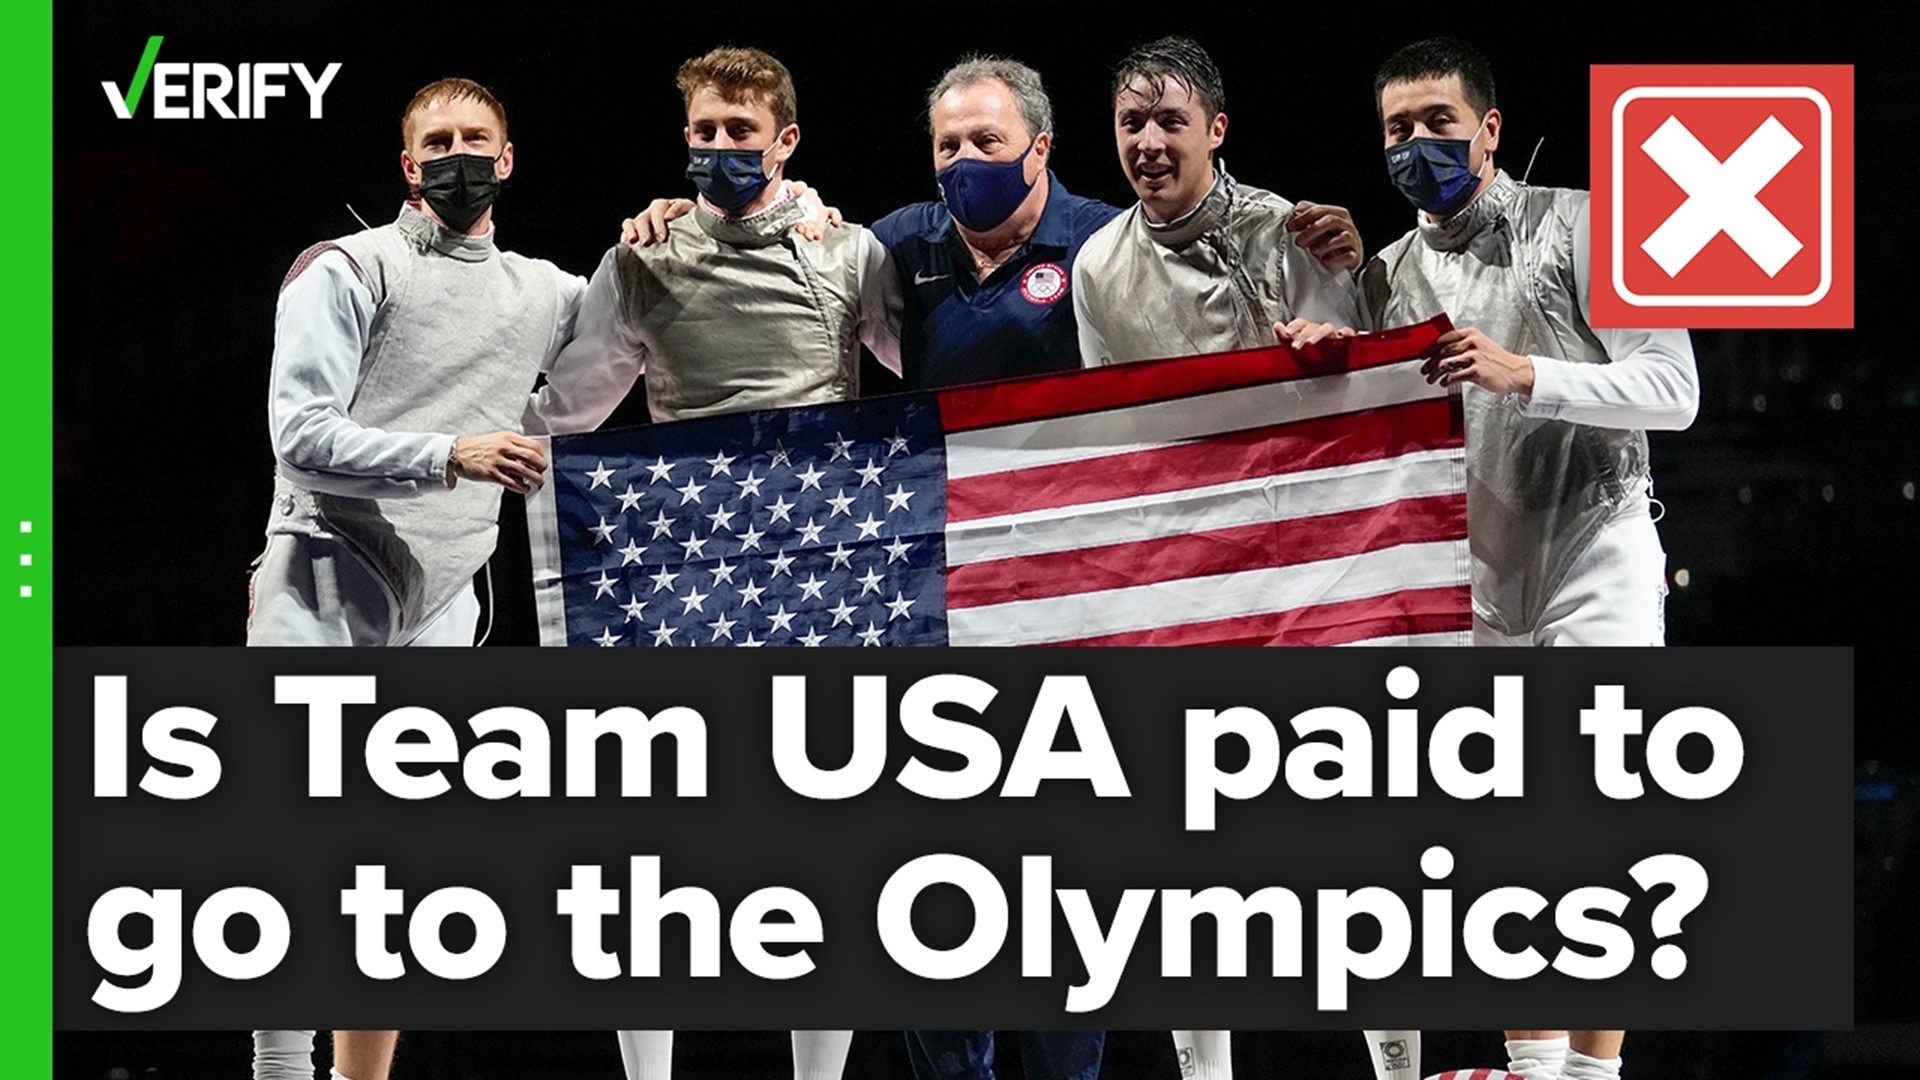 Do athletes get paid to go to the Olympics? The VERIFY team confirms this is false.